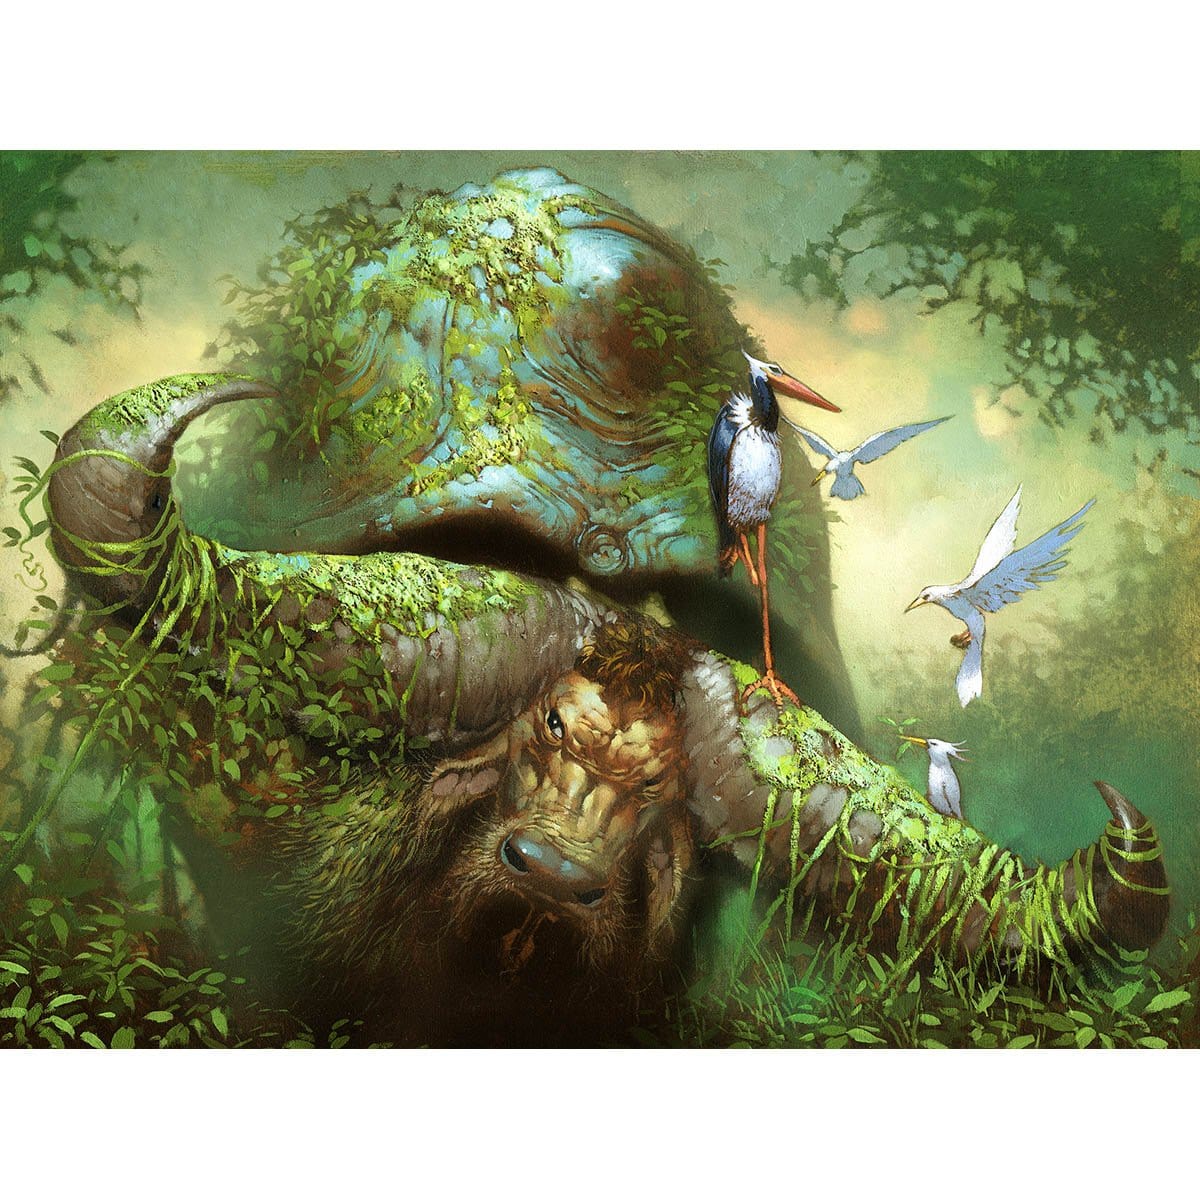 Vigor Print - Print - Original Magic Art - Accessories for Magic the Gathering and other card games